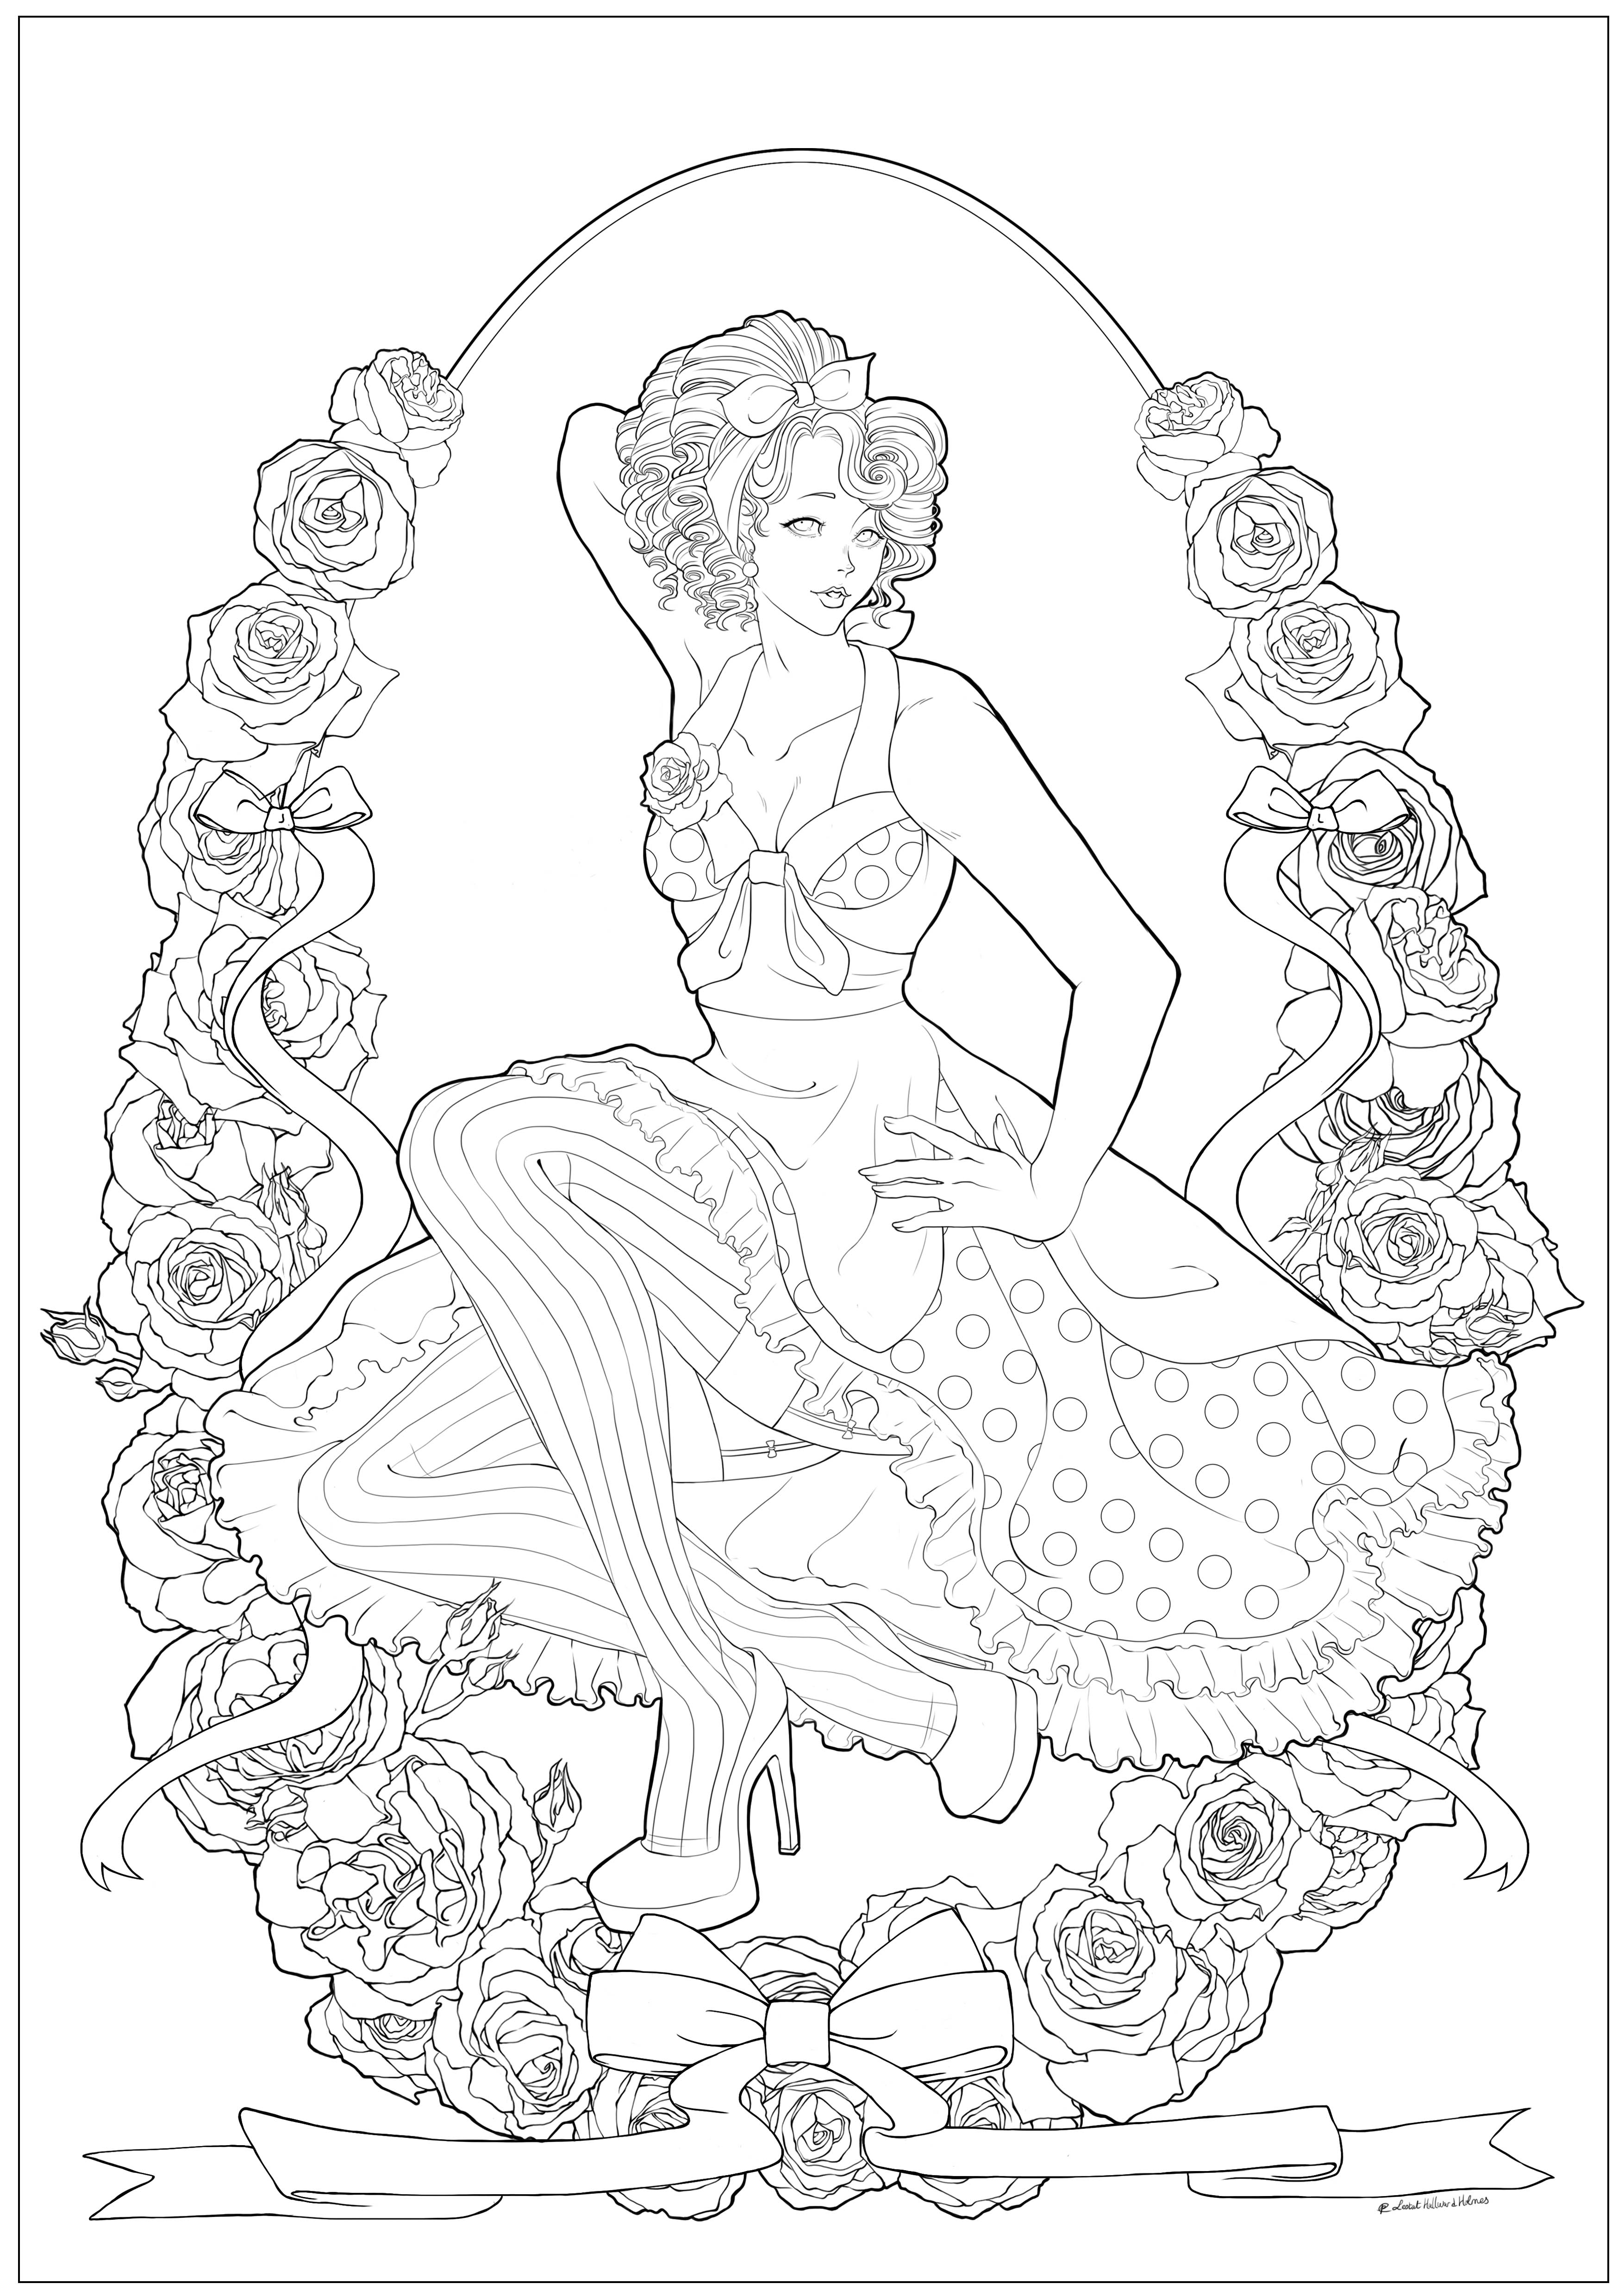 vintage coloring pages collectibles